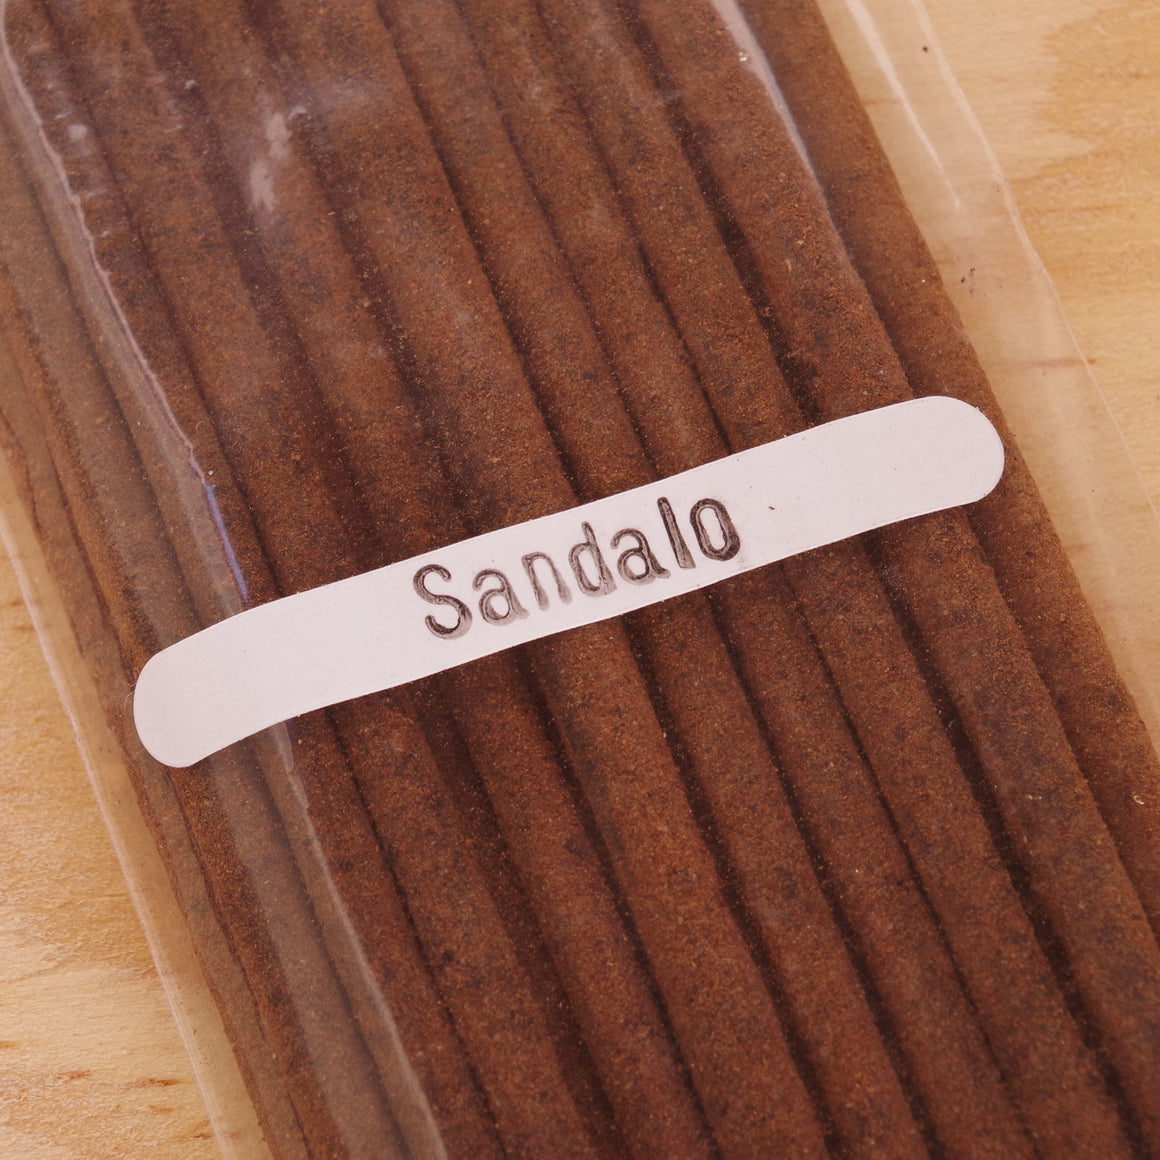 100 sticks Sandalwood Incense Handrolled in Mexico Long Duration 1.5 hours